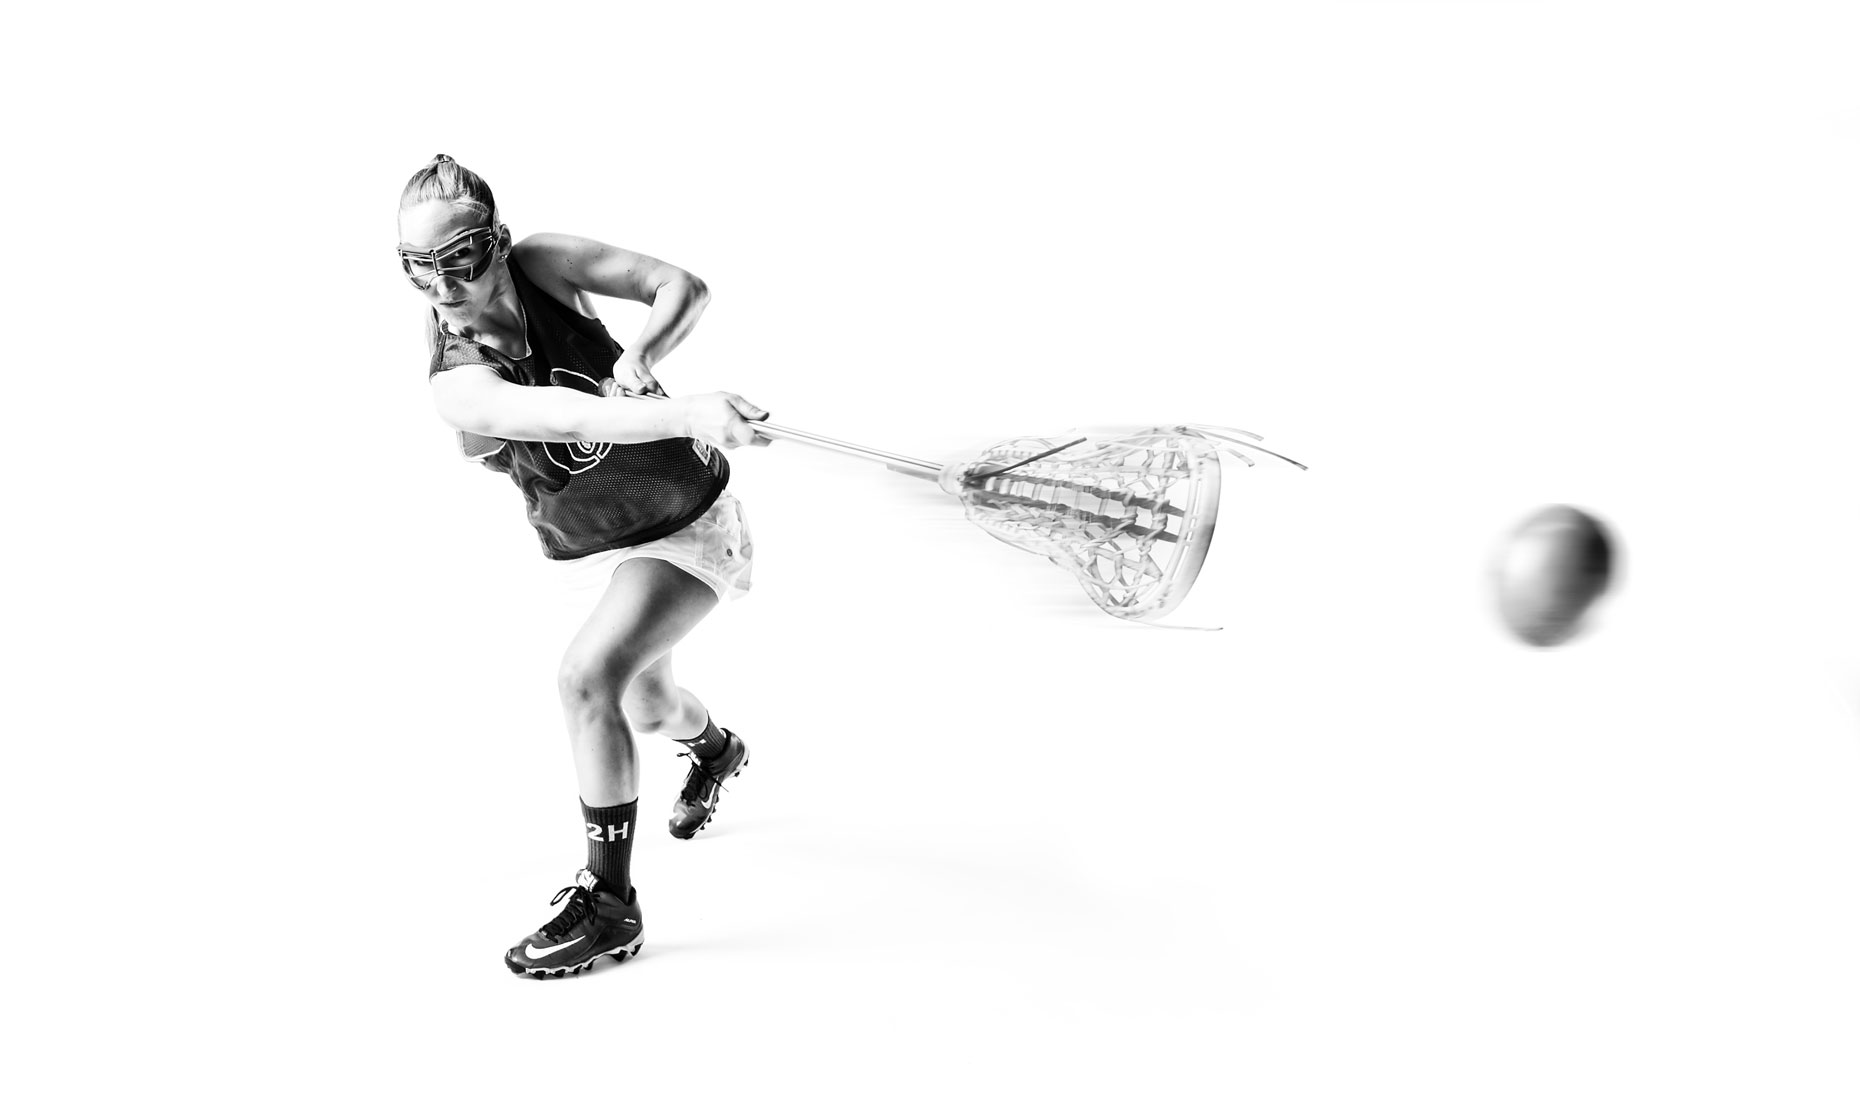 Girl/lacrosse/throwing ball/b&w/lifestyle photography